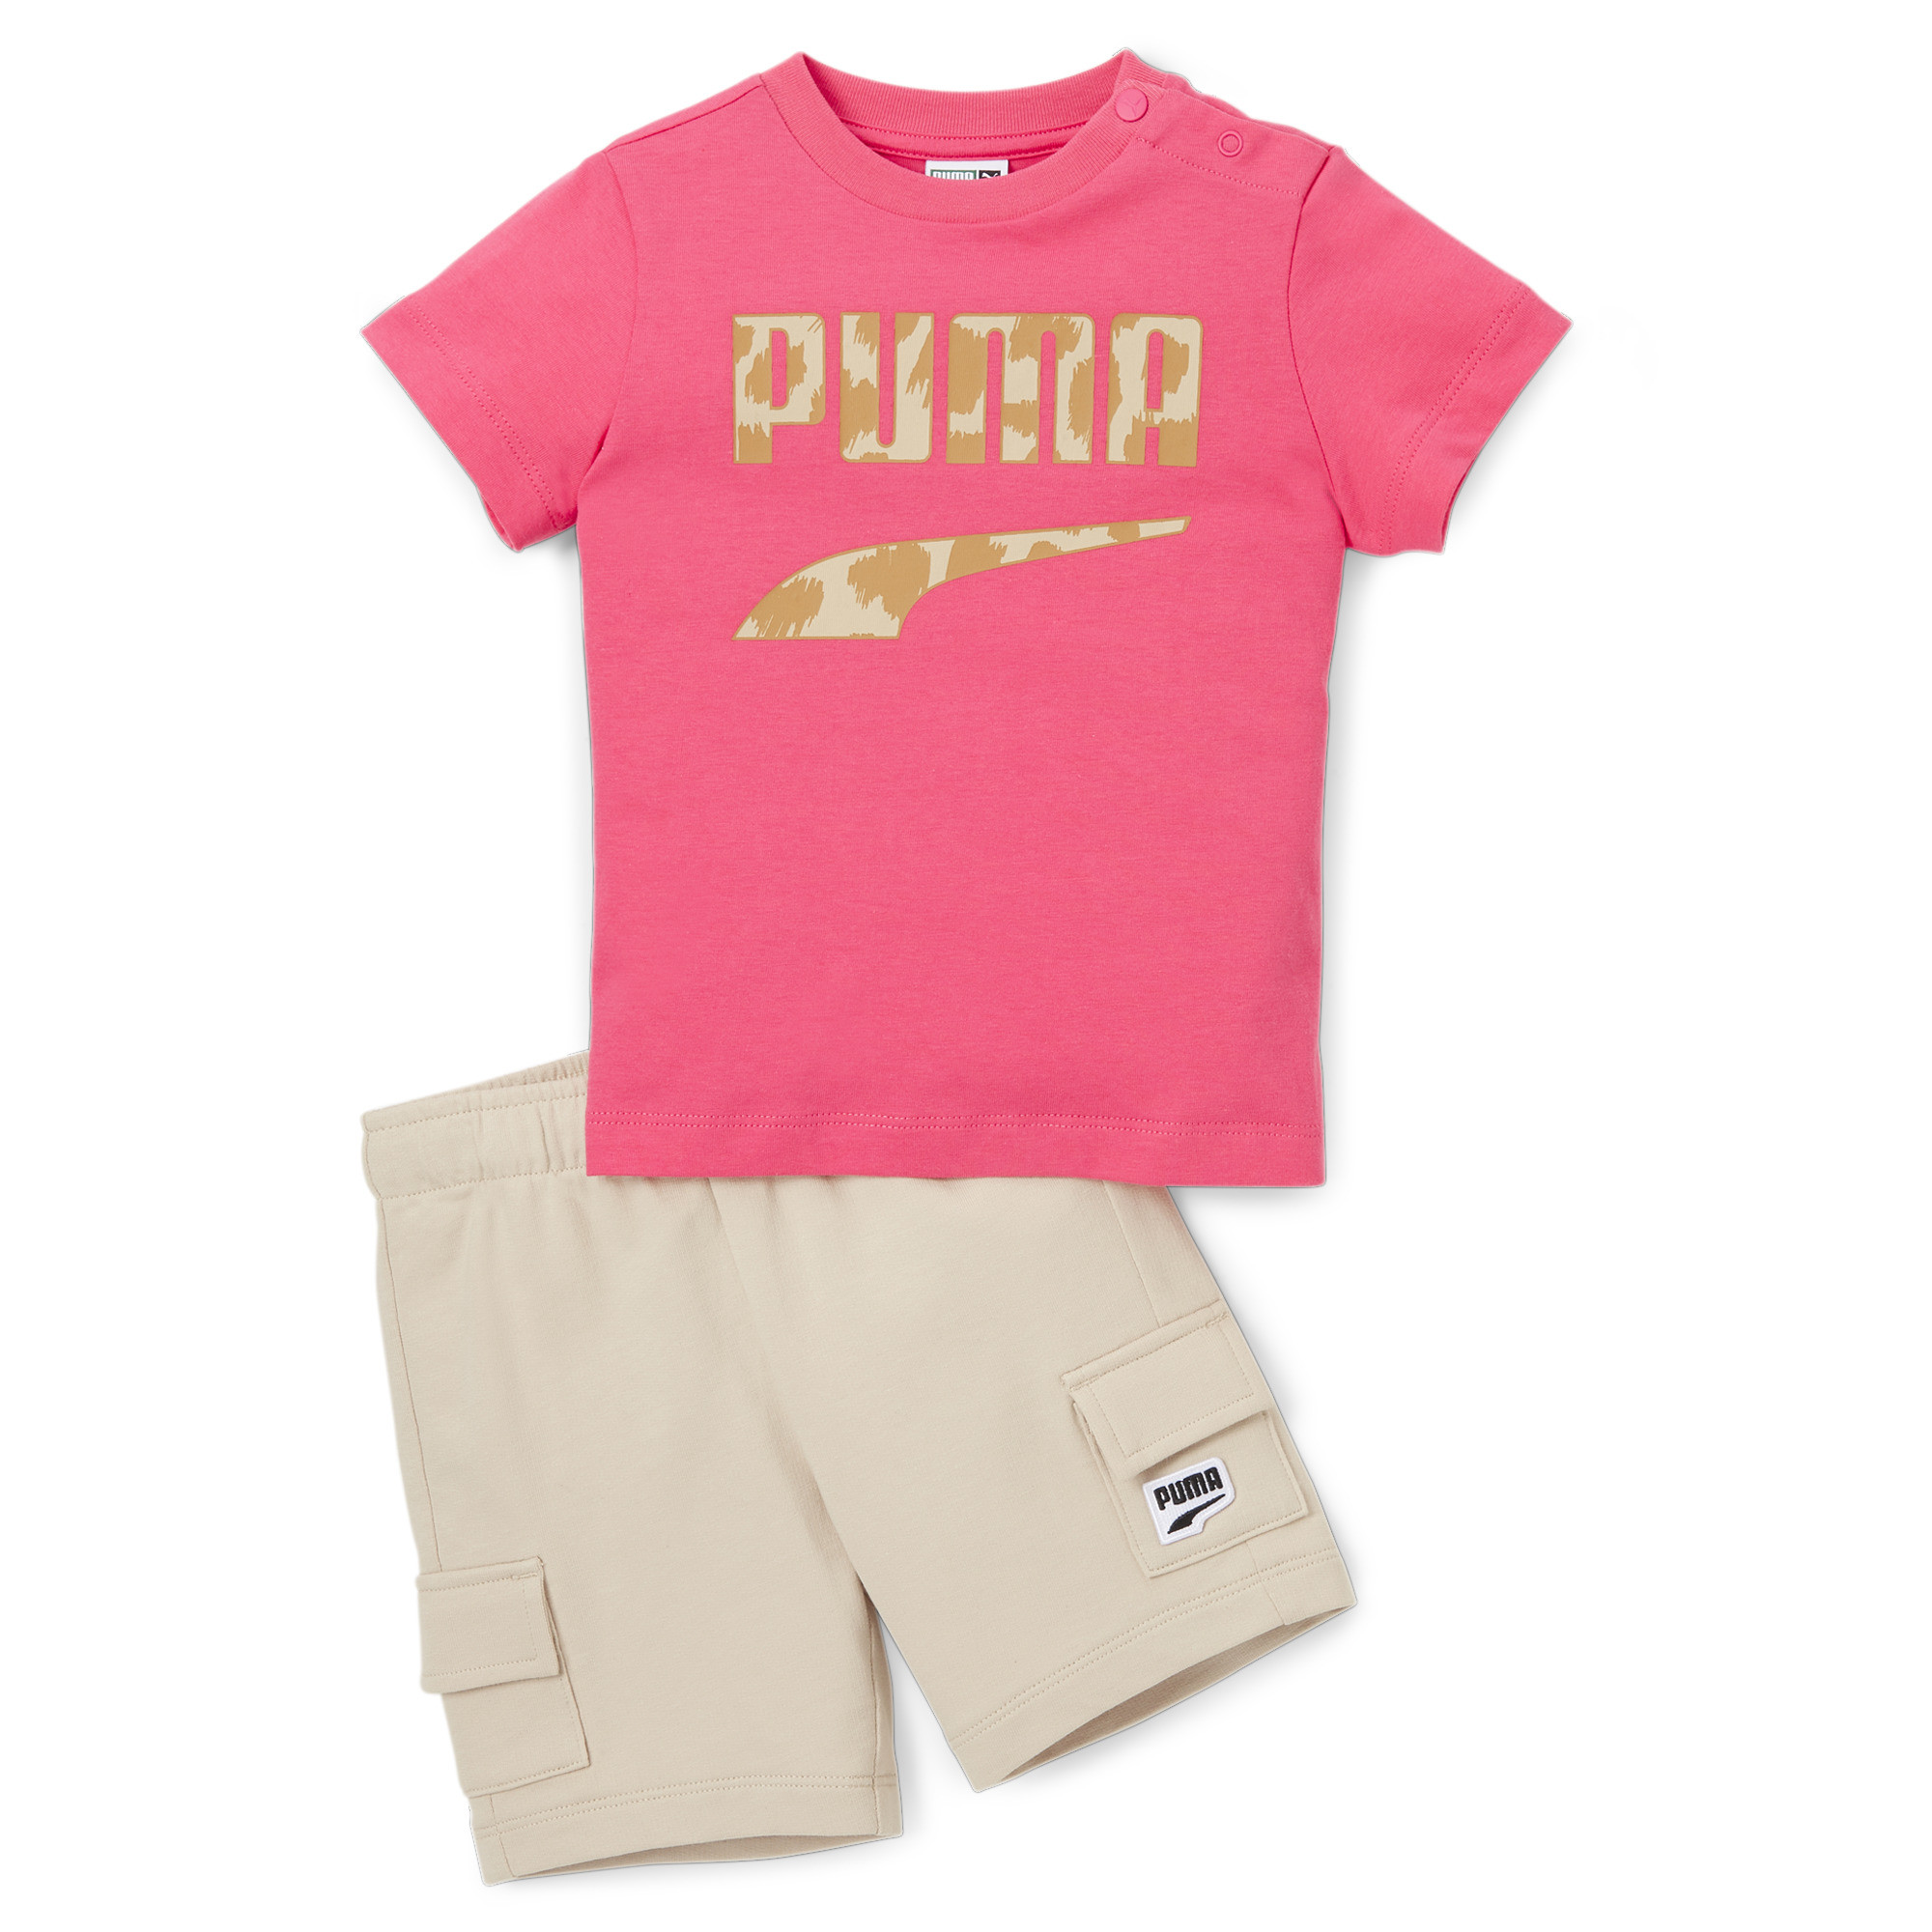 Kids' PUMA Minicats Downtown Set Baby In Pink, Size 2-4 Months